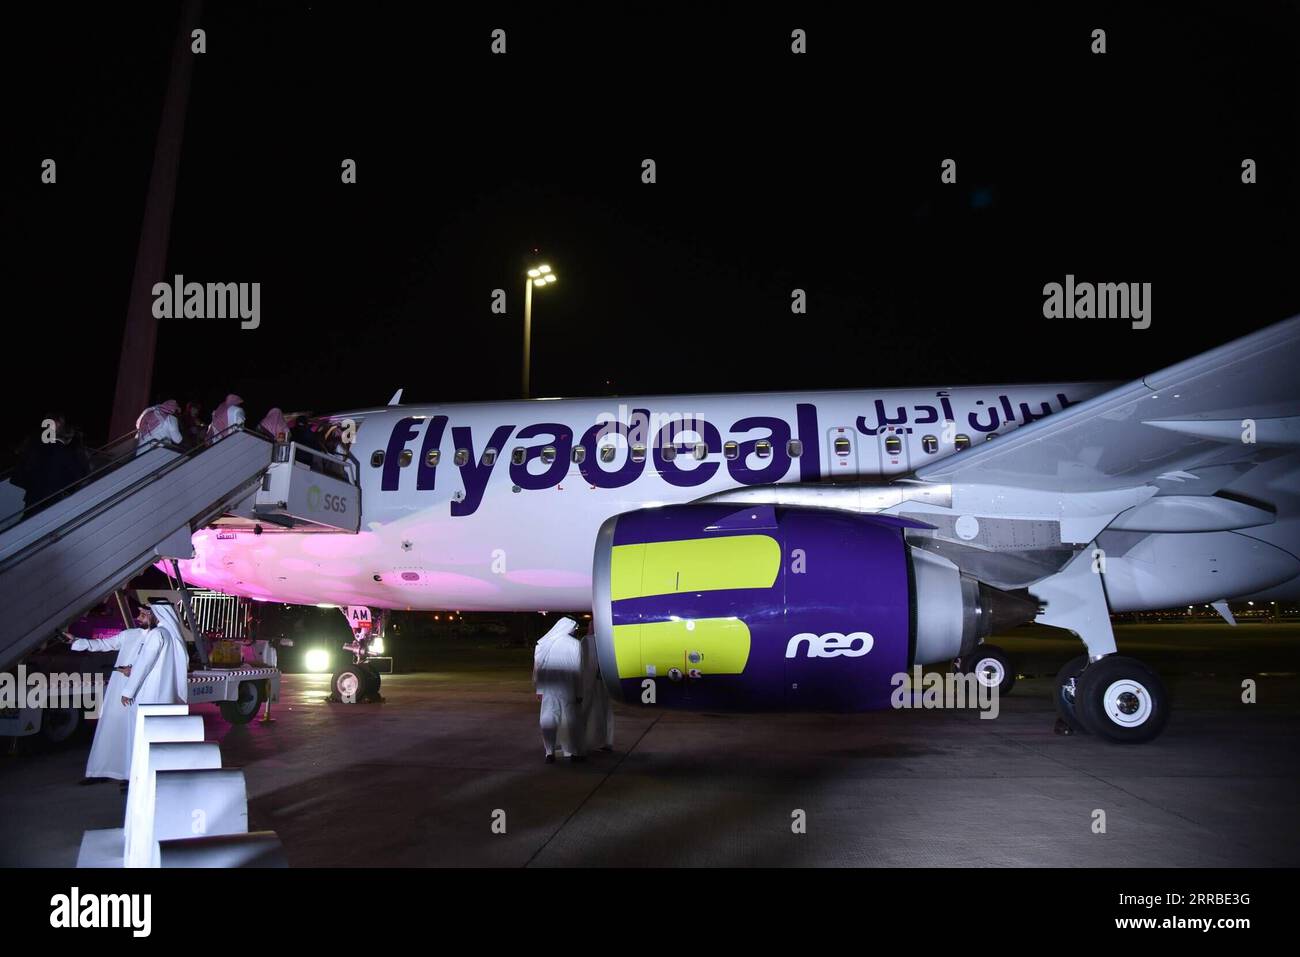 210916 -- JEDDAH, Sept. 16, 2021 -- Photo taken on Sept. 15, 2021 shows the Airbus A320neo jet received by Flyadeal at King Abdulaziz International Airport in Jeddah, Saudi Arabia. Flyadeal, a low-cost Saudi Arabian airline, officially inaugurated on Wednesday its latest Airbus A320neo jet, the third delivery in three months. Flyadeal, mainly serving domestic destinations, is founded in 2017 and owned by Saudi flag carrier Saudia. It has started international operations between Riyadh and Dubai, United Arab Emirates since July.  SAUDI ARABIA-JEDDAH-FLYADEAL AIRLINE-AIRBUS A320NEO HuxGuan PUBLI Stock Photo